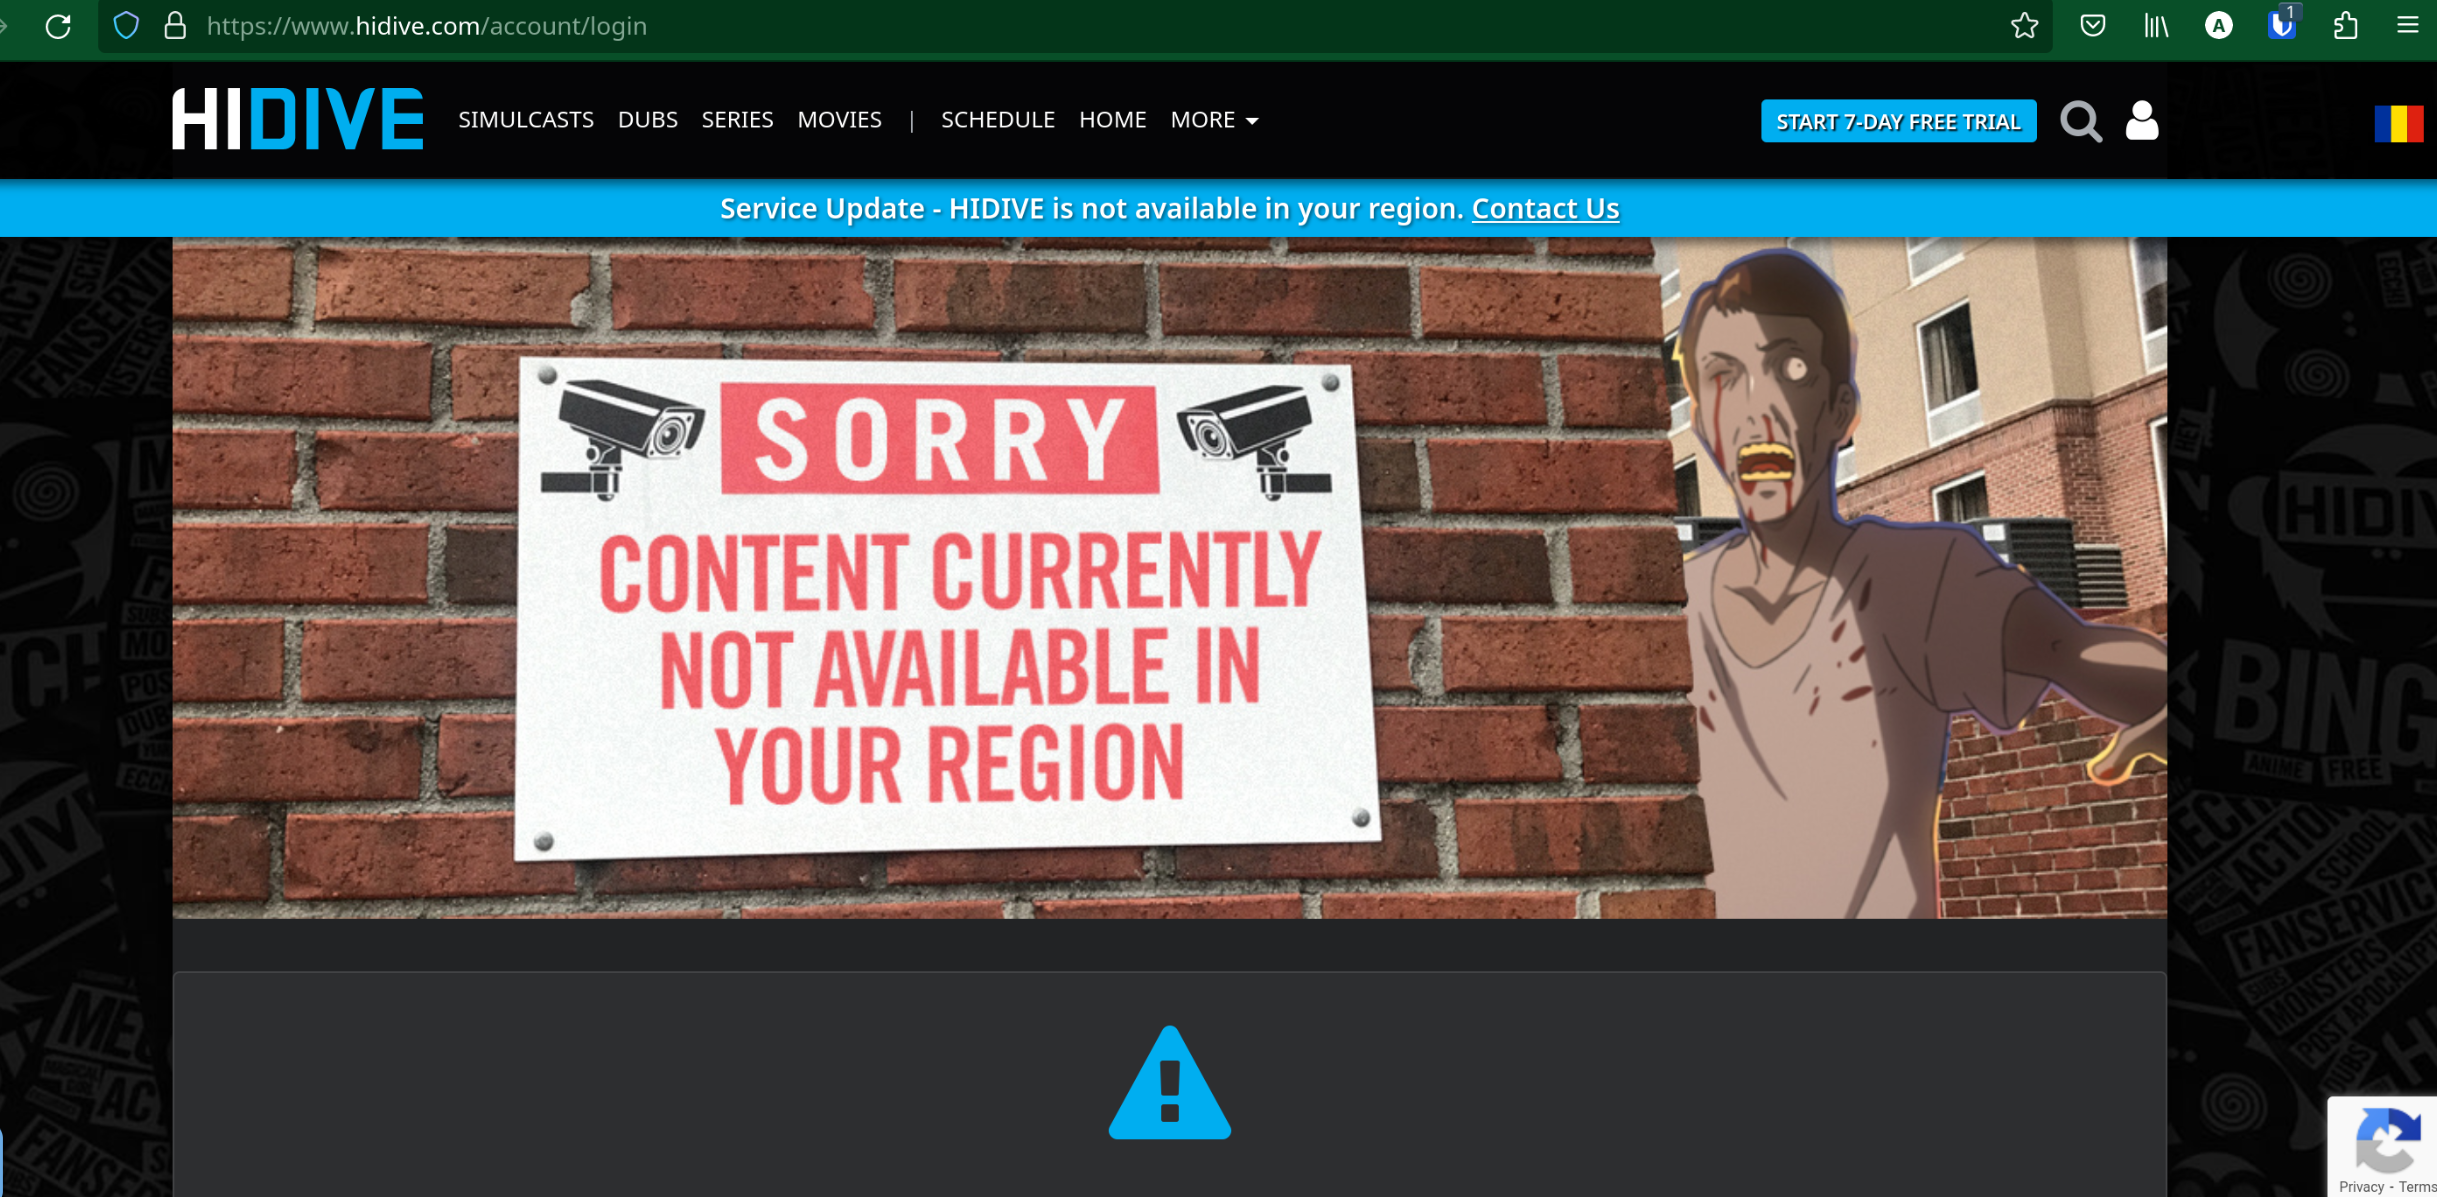 The image banner that loaded showing a large text of "CONTENT CURRENTLY NOT AVAILABLE IN YOUR REGION"